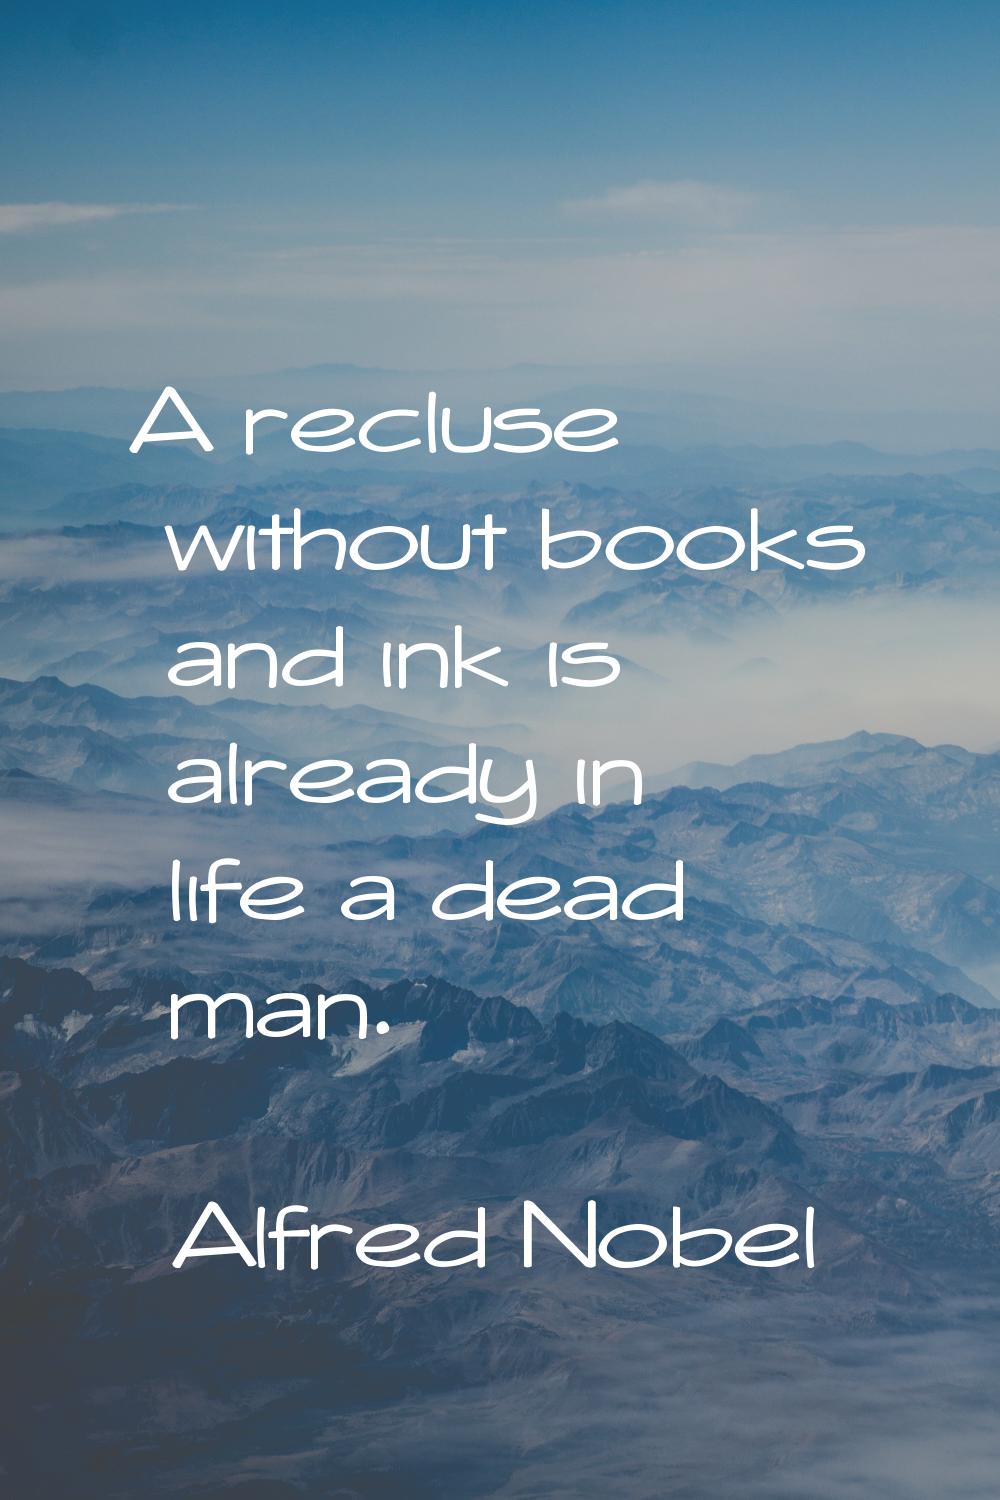 A recluse without books and ink is already in life a dead man.